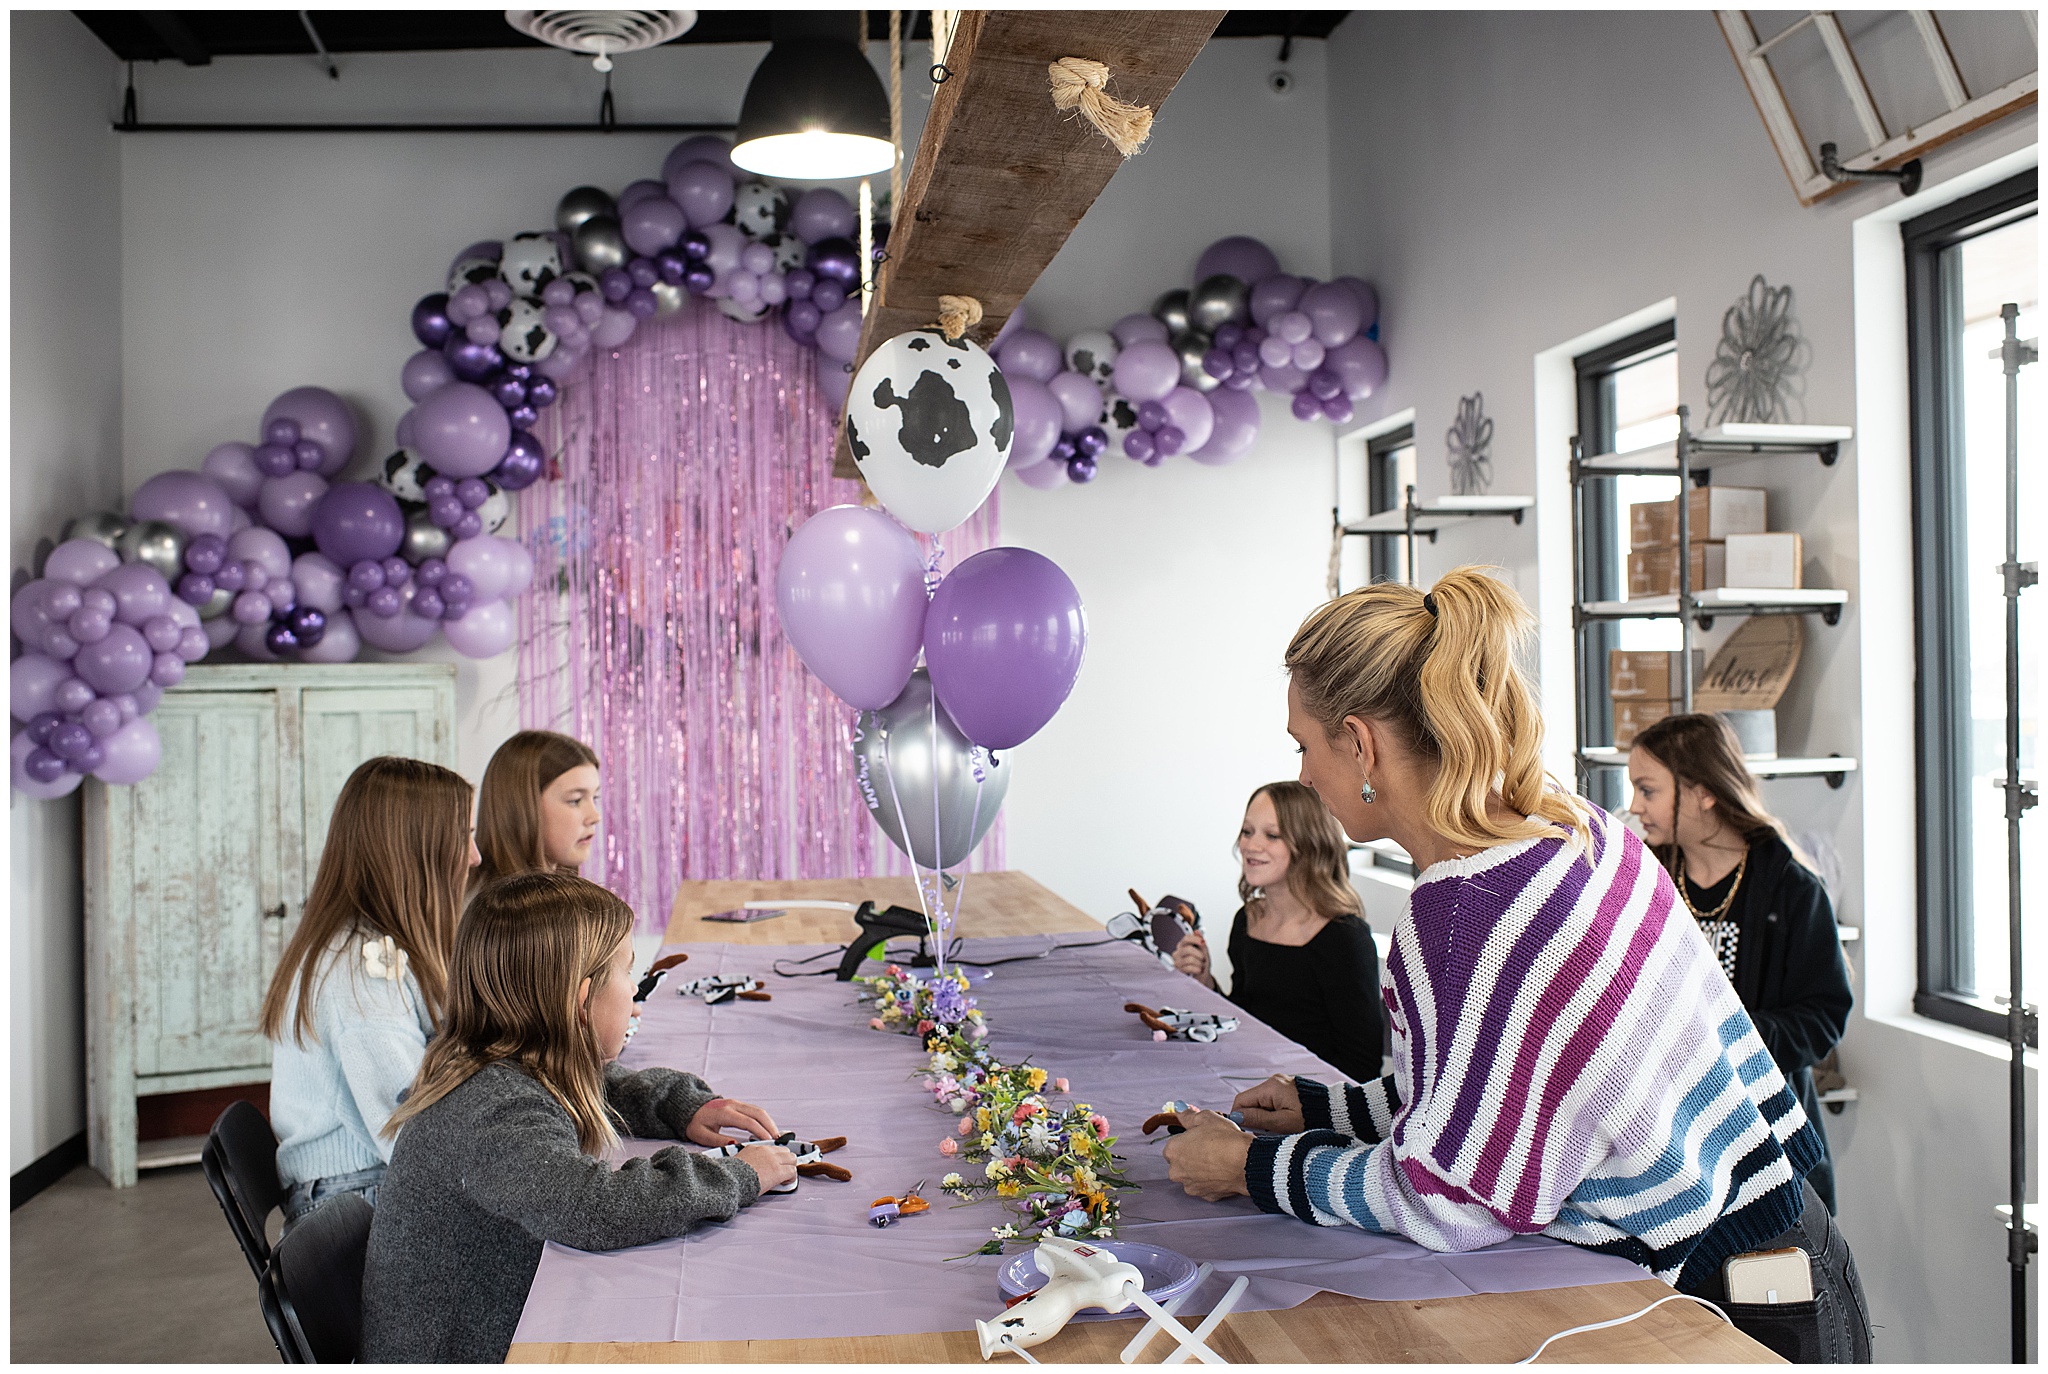 A woman leads girls in an arts and crafts event surrounded by purple, silver and cow pattern balloons colorado springs event planner